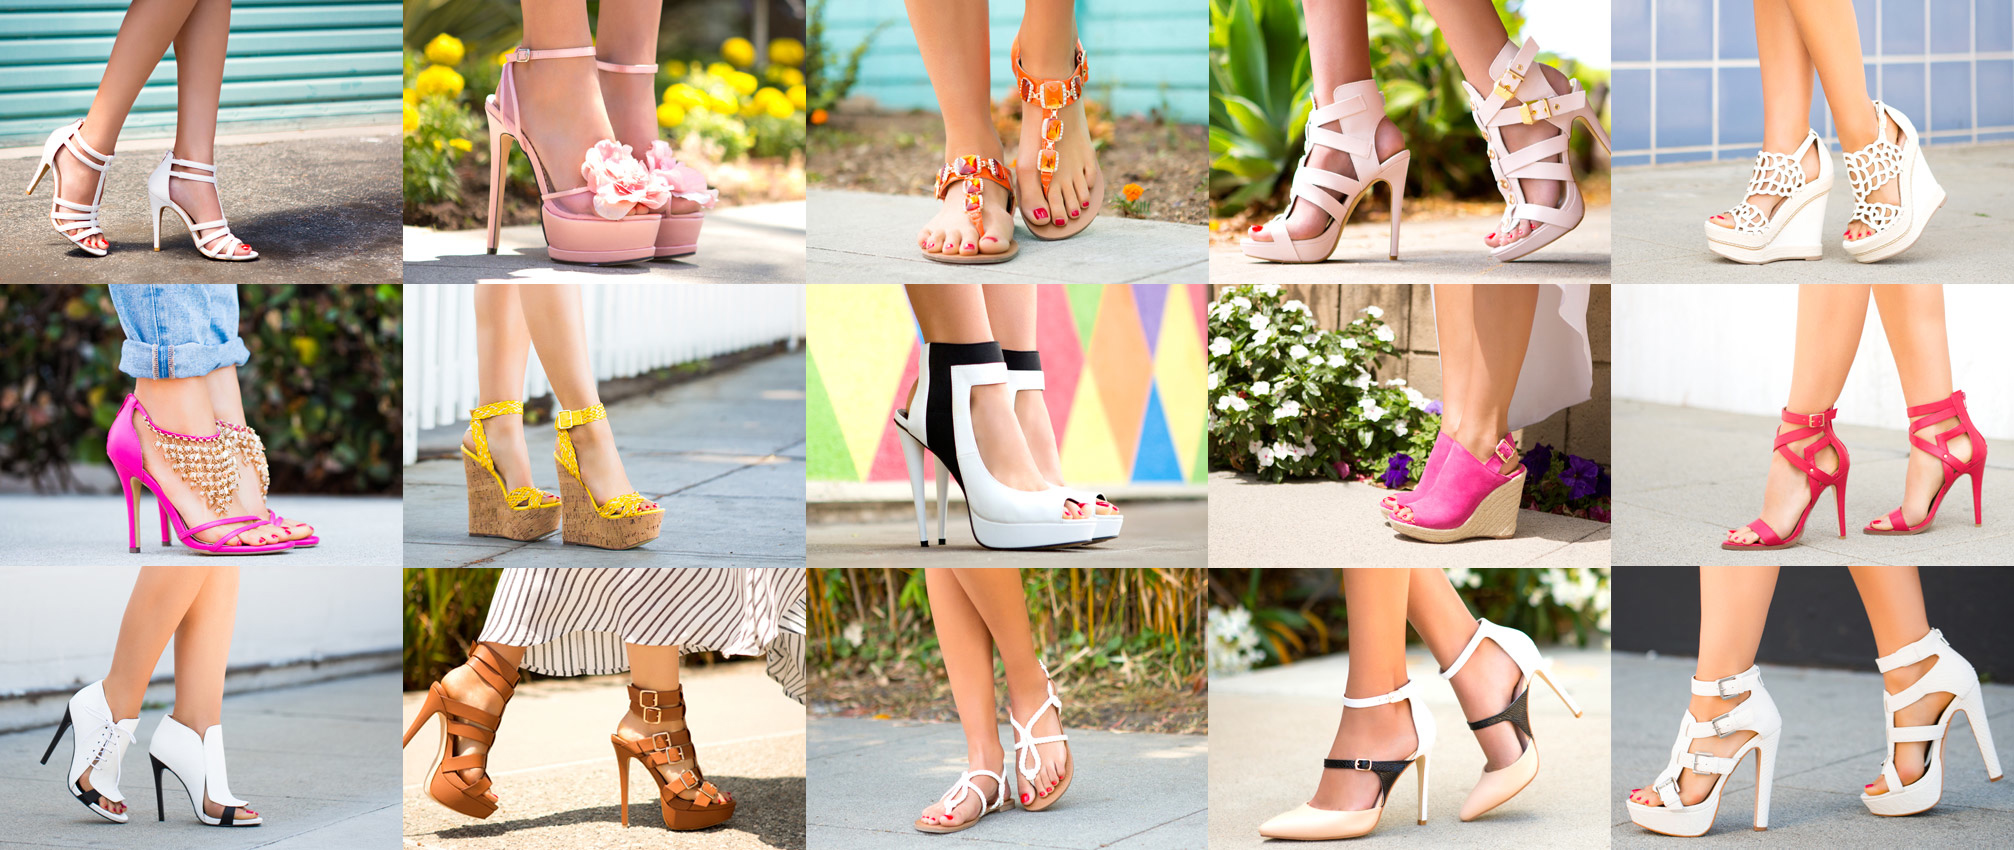 Free Shipping on Your First Order at ShoeDazzle + Get 75% Off!